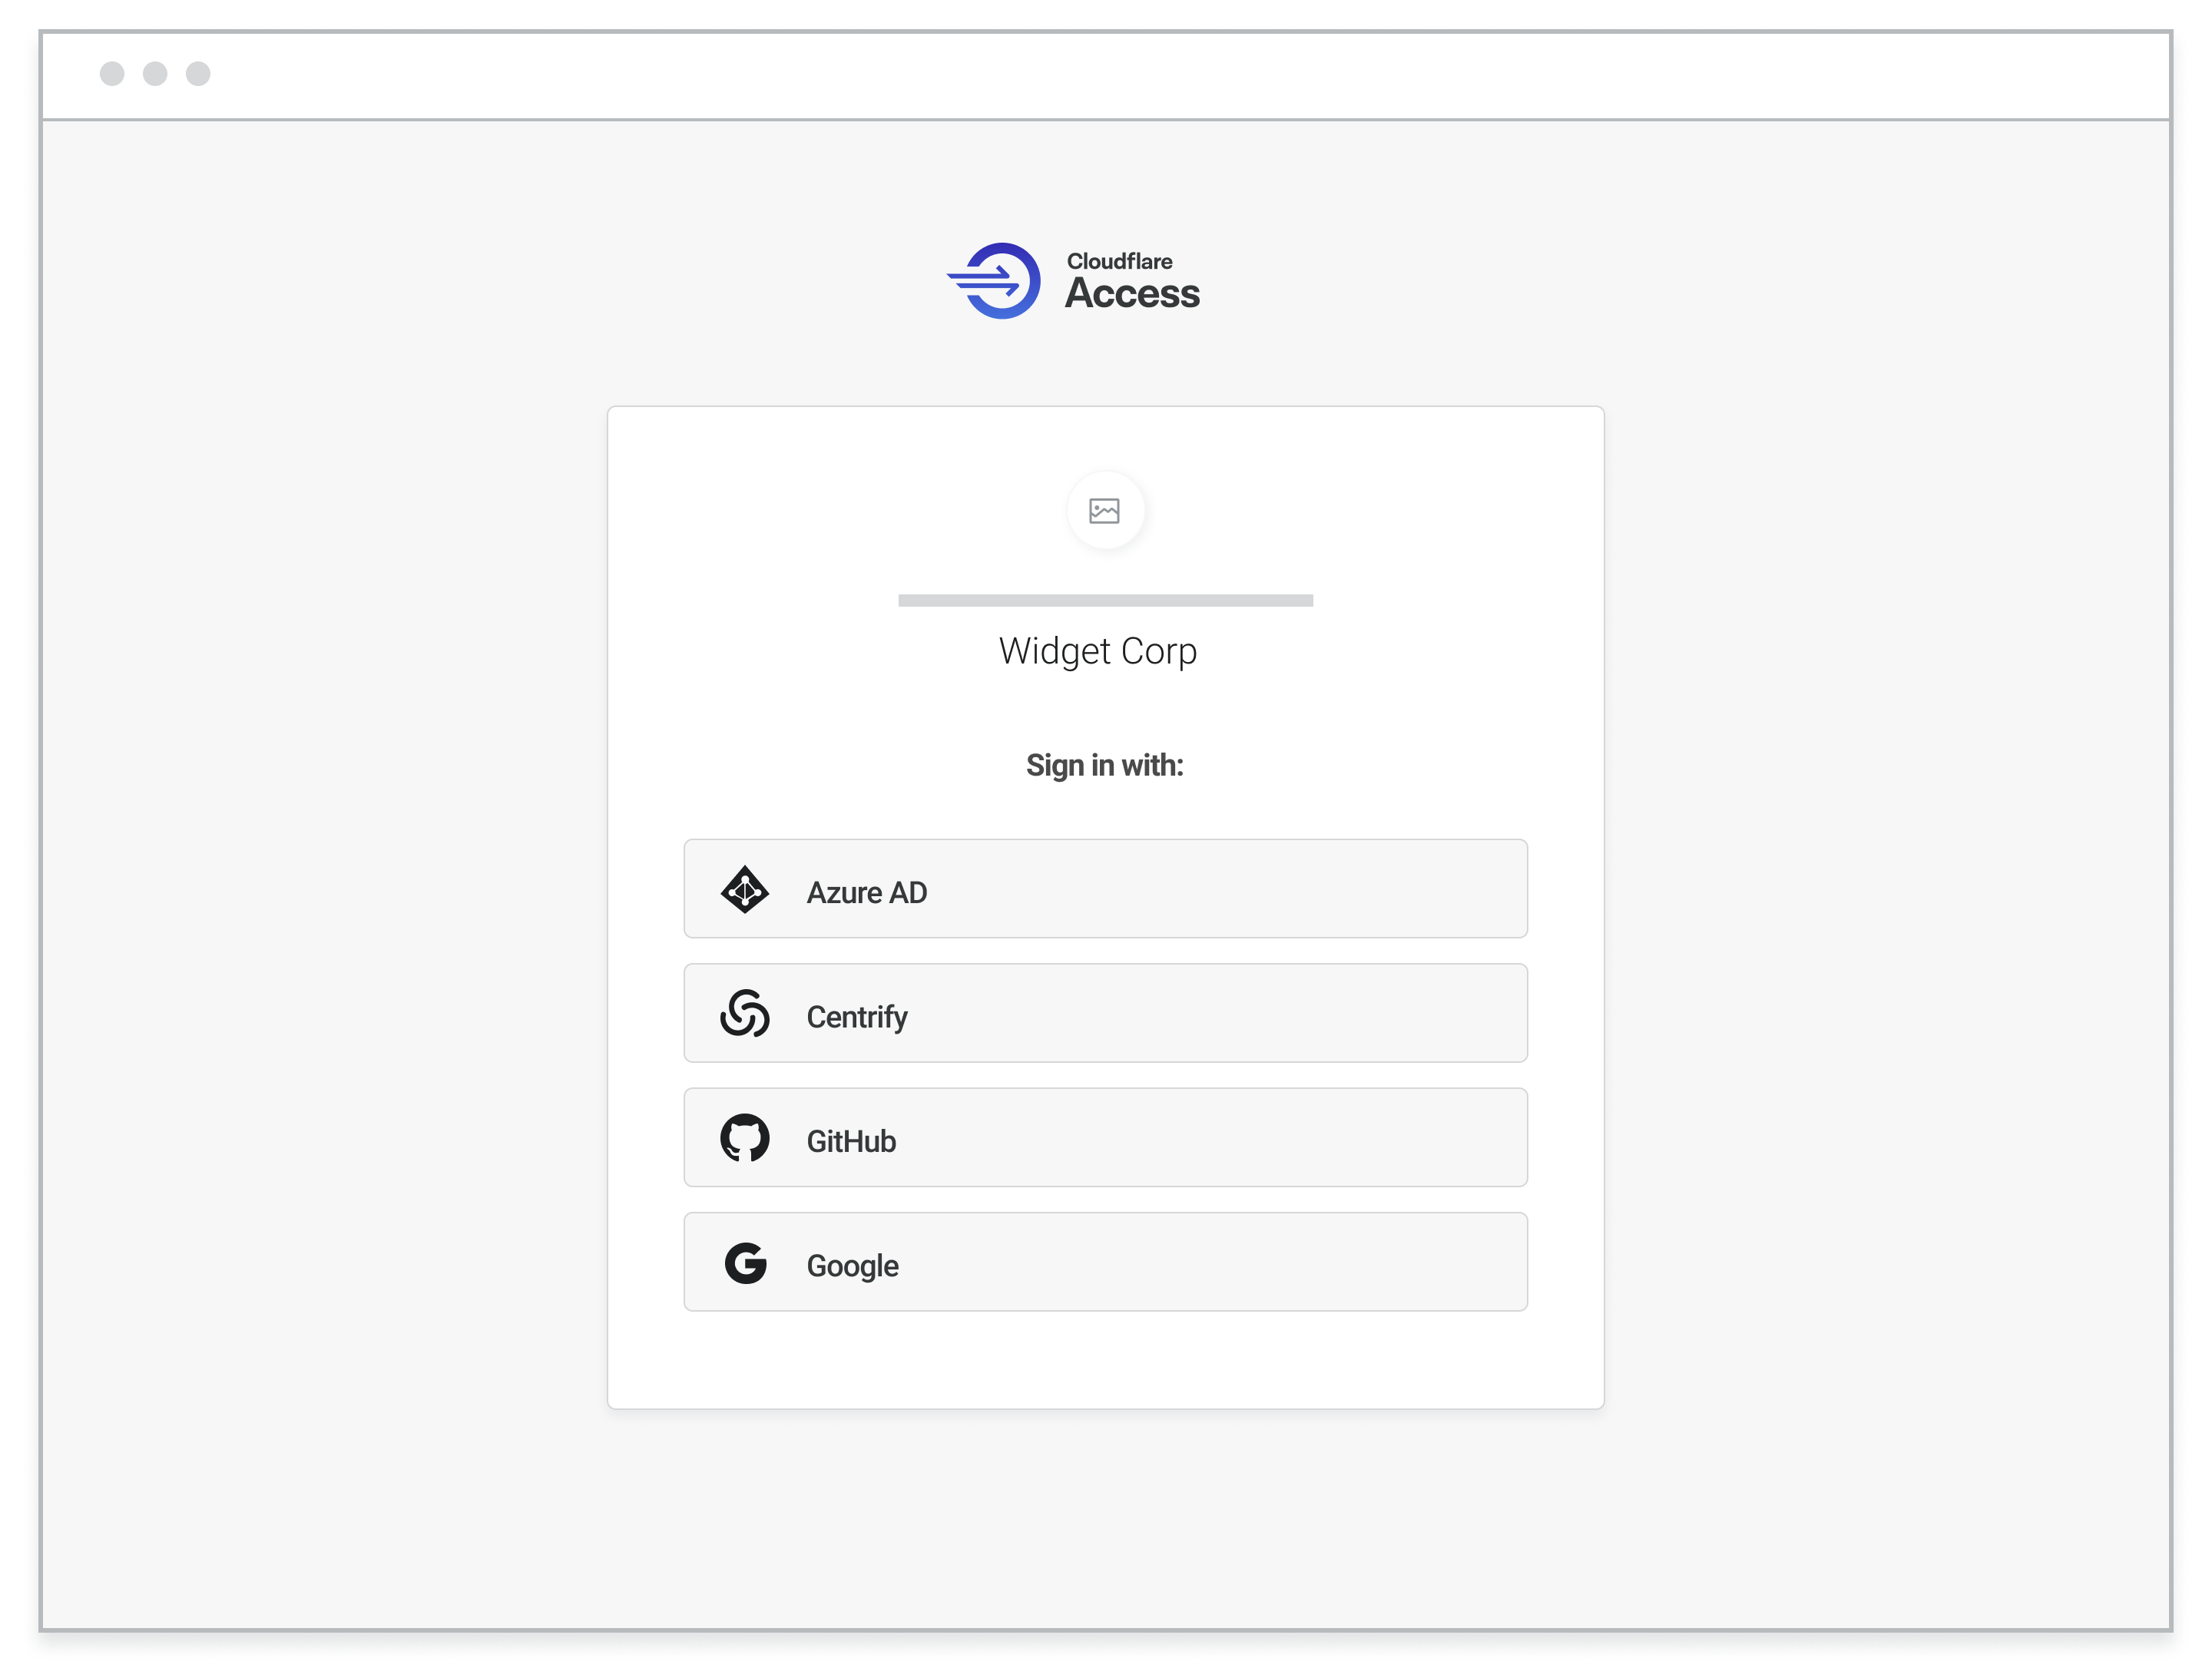 Cloudflare for Teams - Cloudflare Access login - multiple ways to sign in